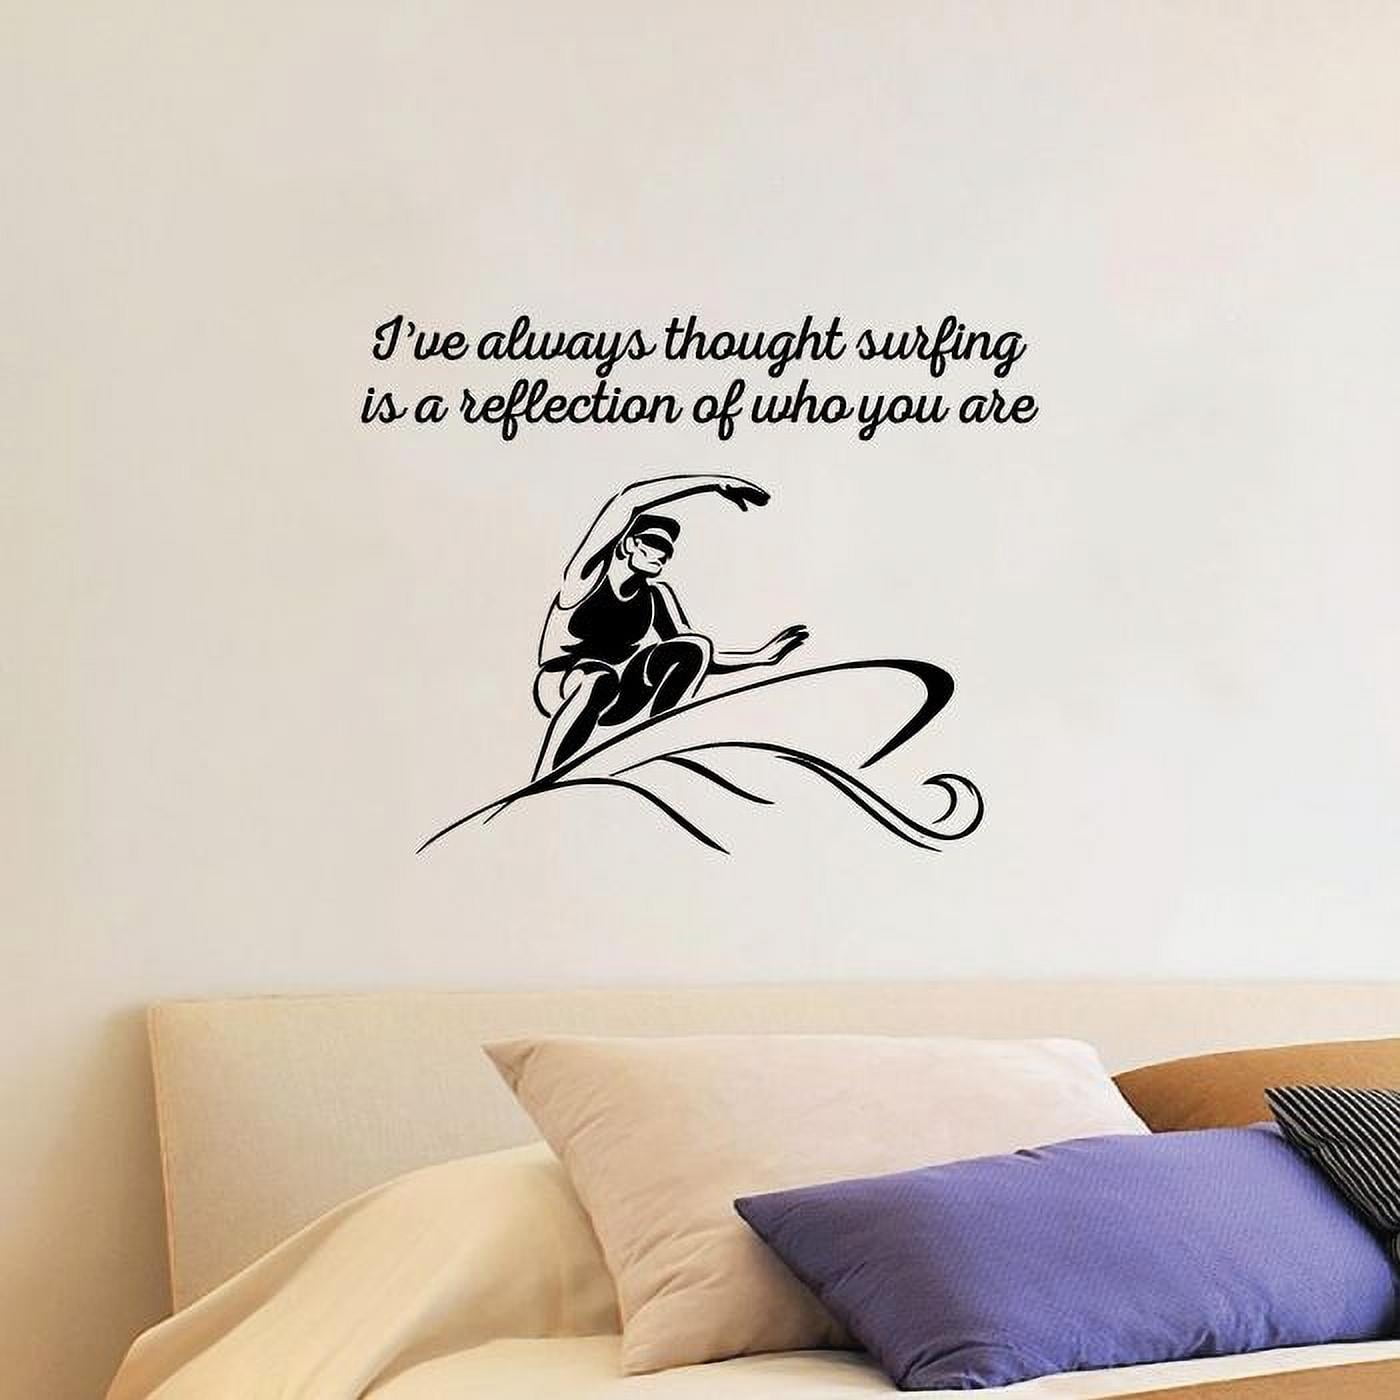 SURFING QUOTE PADDLE wall art sticker vinyl DECAL SURF 